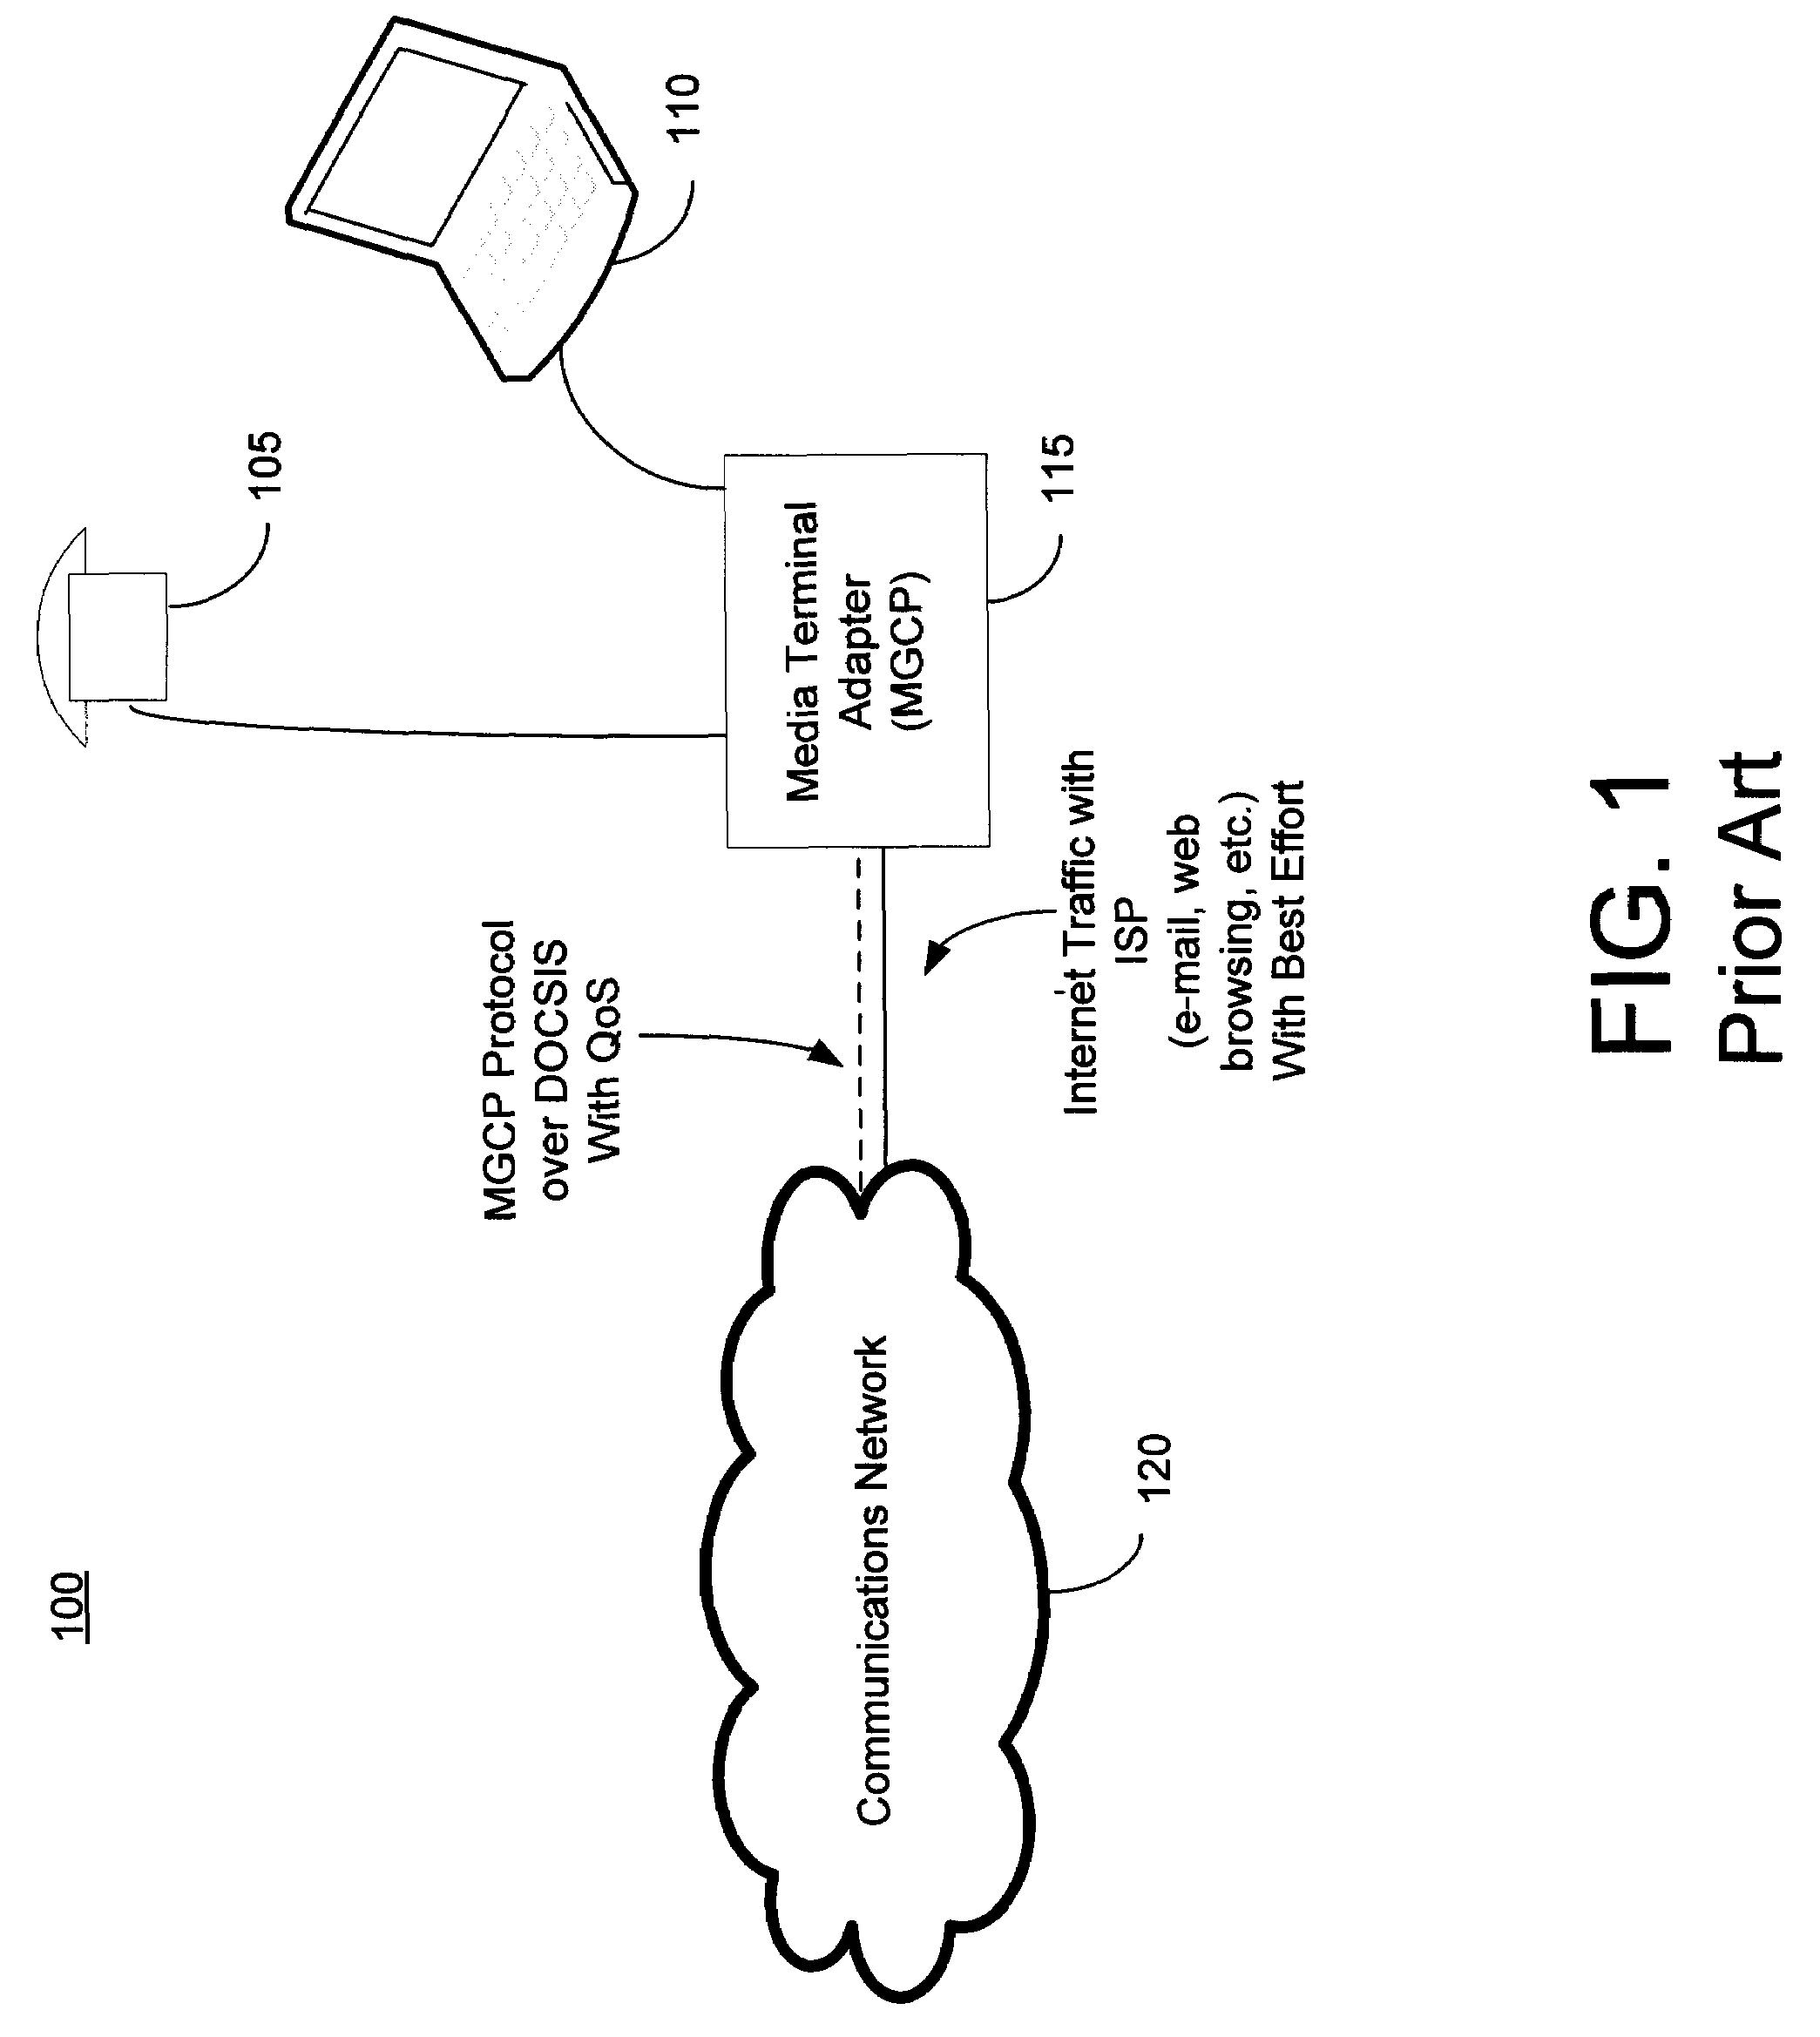 Media terminal adapter with session initiation protocol (SIP) proxy